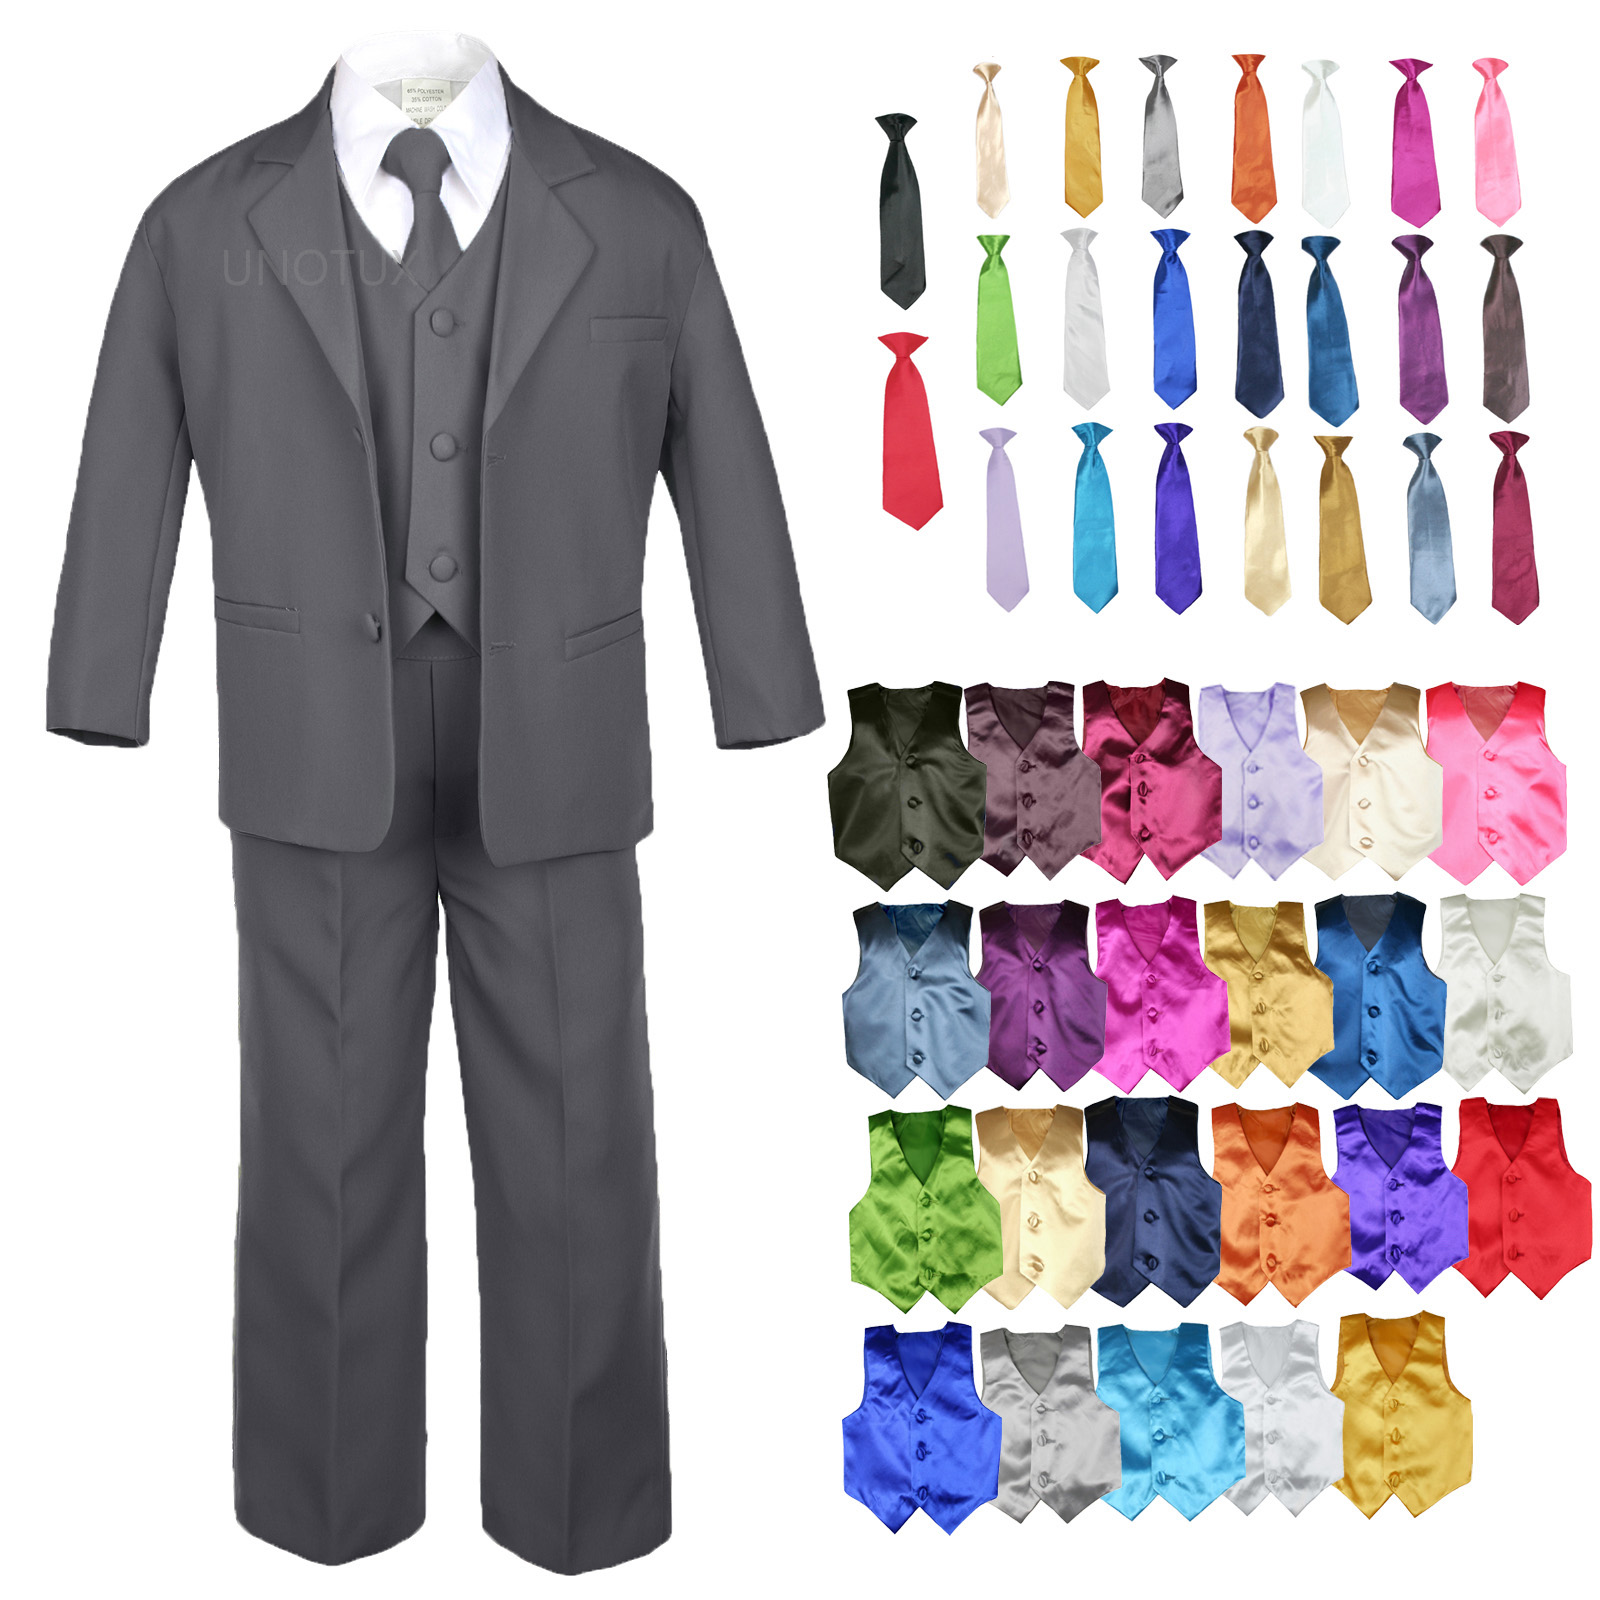 LEADERTUX 7pc S M L XL 2T 3T 4T Baby Toddler Boys Dark Grey Suits Tuxedo Formal Wedding Party Outfit Extra Satin Red Necktie Vest Set